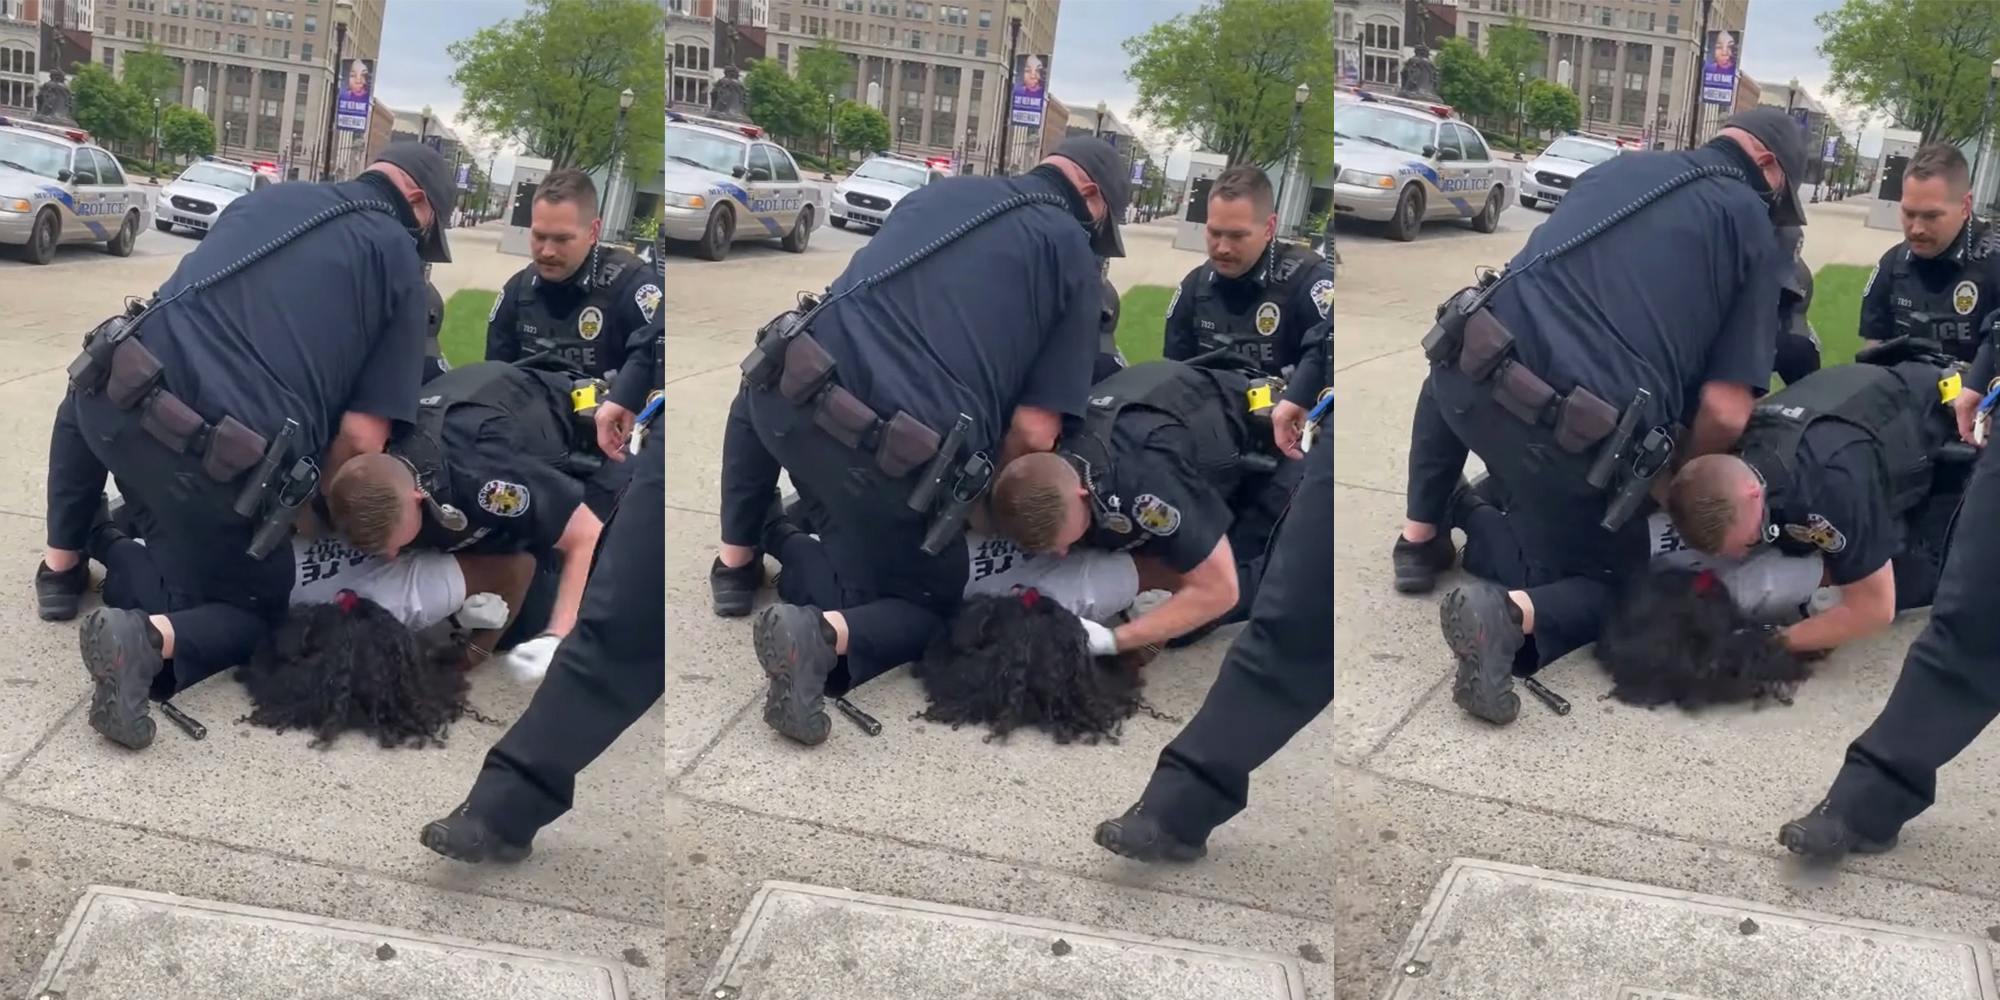 police officer punches man in the head while three other officers hold him down